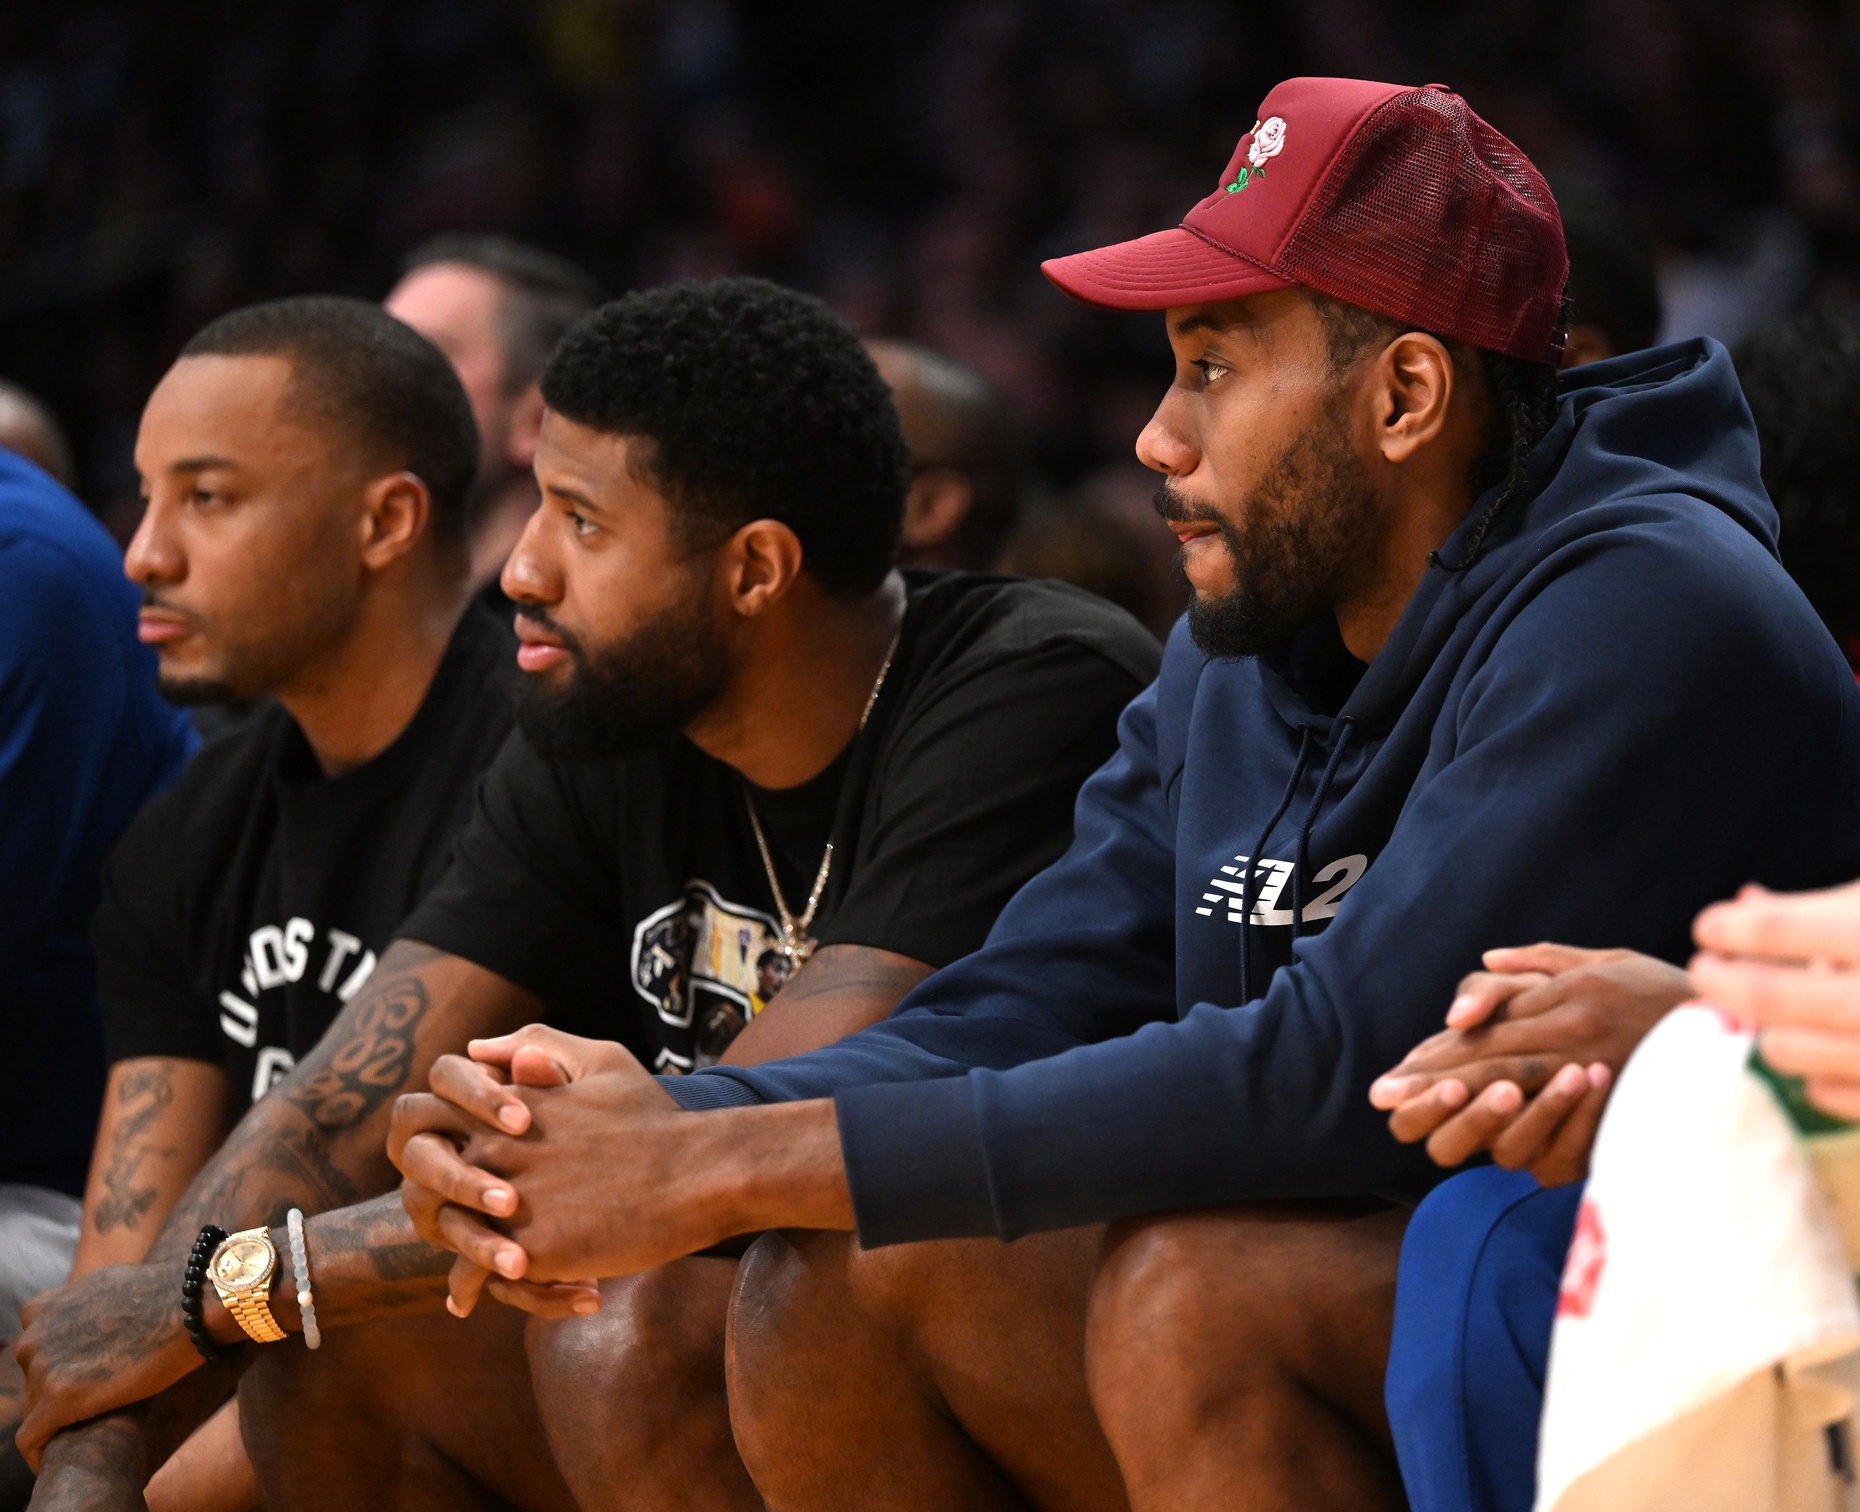 Philadelphia 76ers guard Paul George (13), Los Angeles Clippers forward Norman Powell (24) and forward Kawhi Leonard (2), who could have been Toronto Raptors